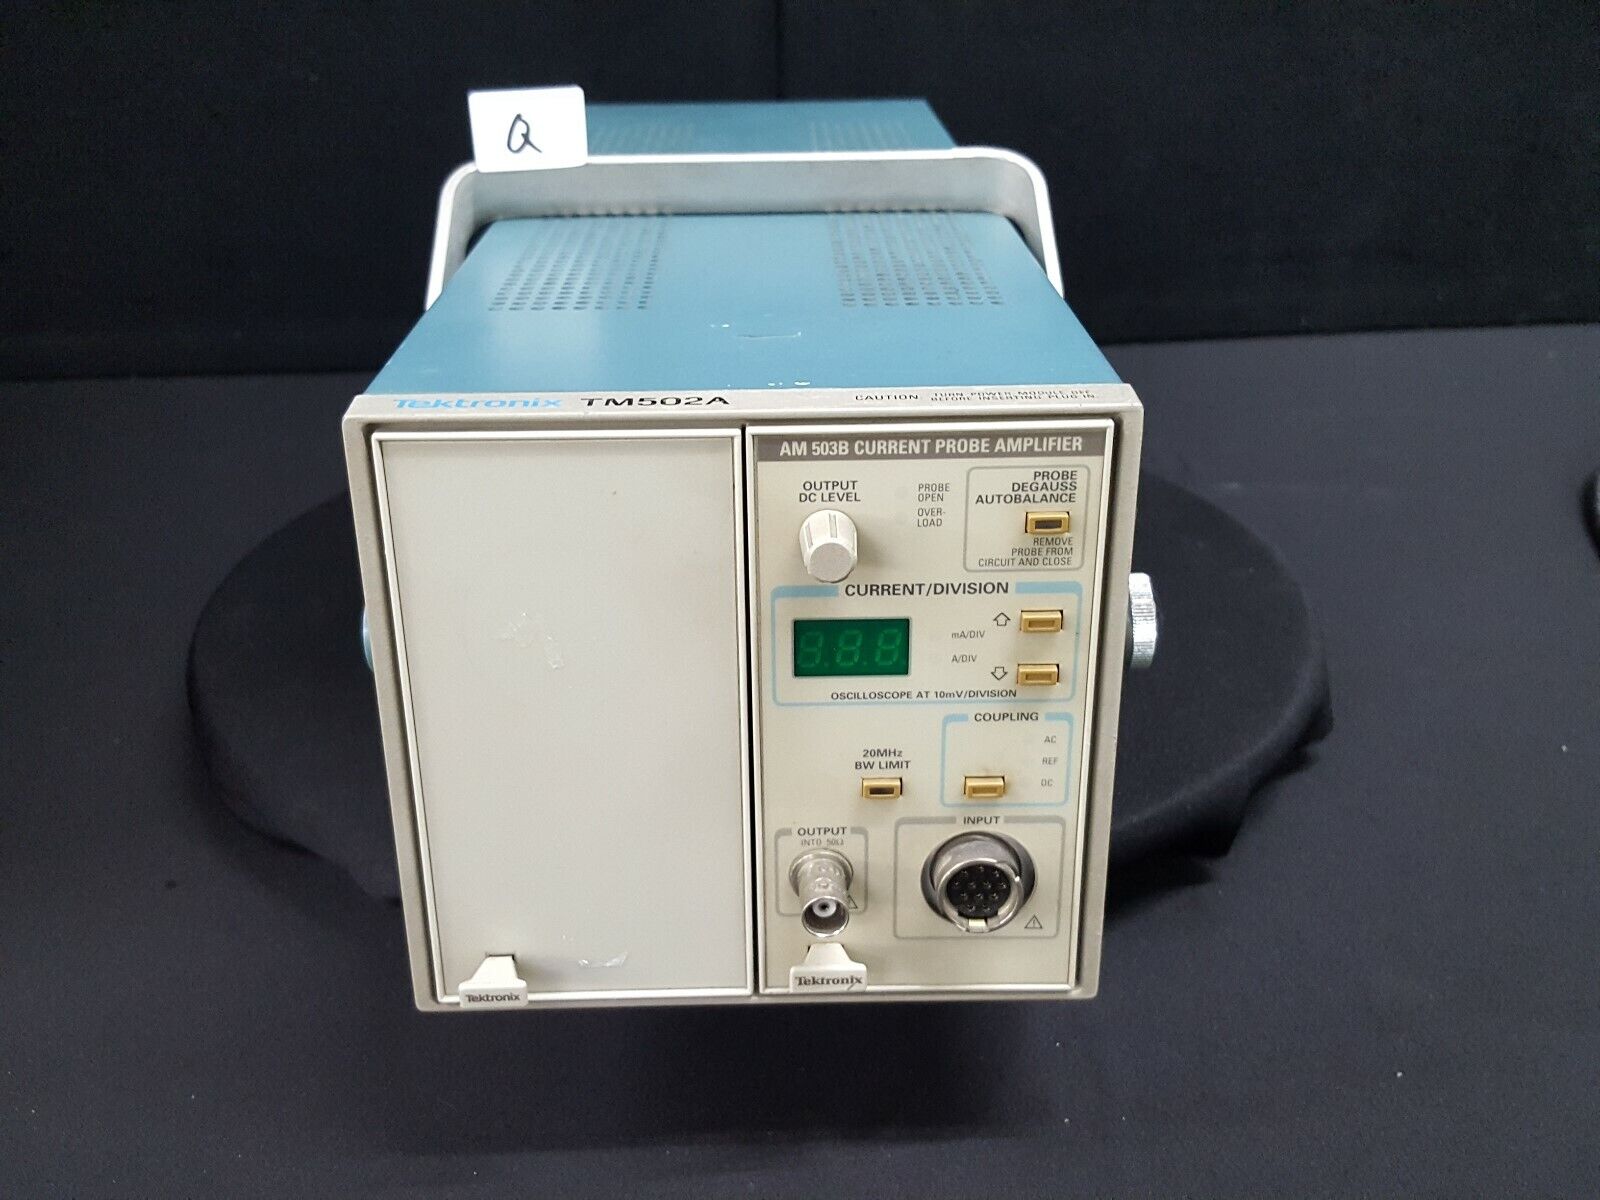 Tektronix TM502A: Mainframe with AM503B Current Probe Amplifier (7317)-Q